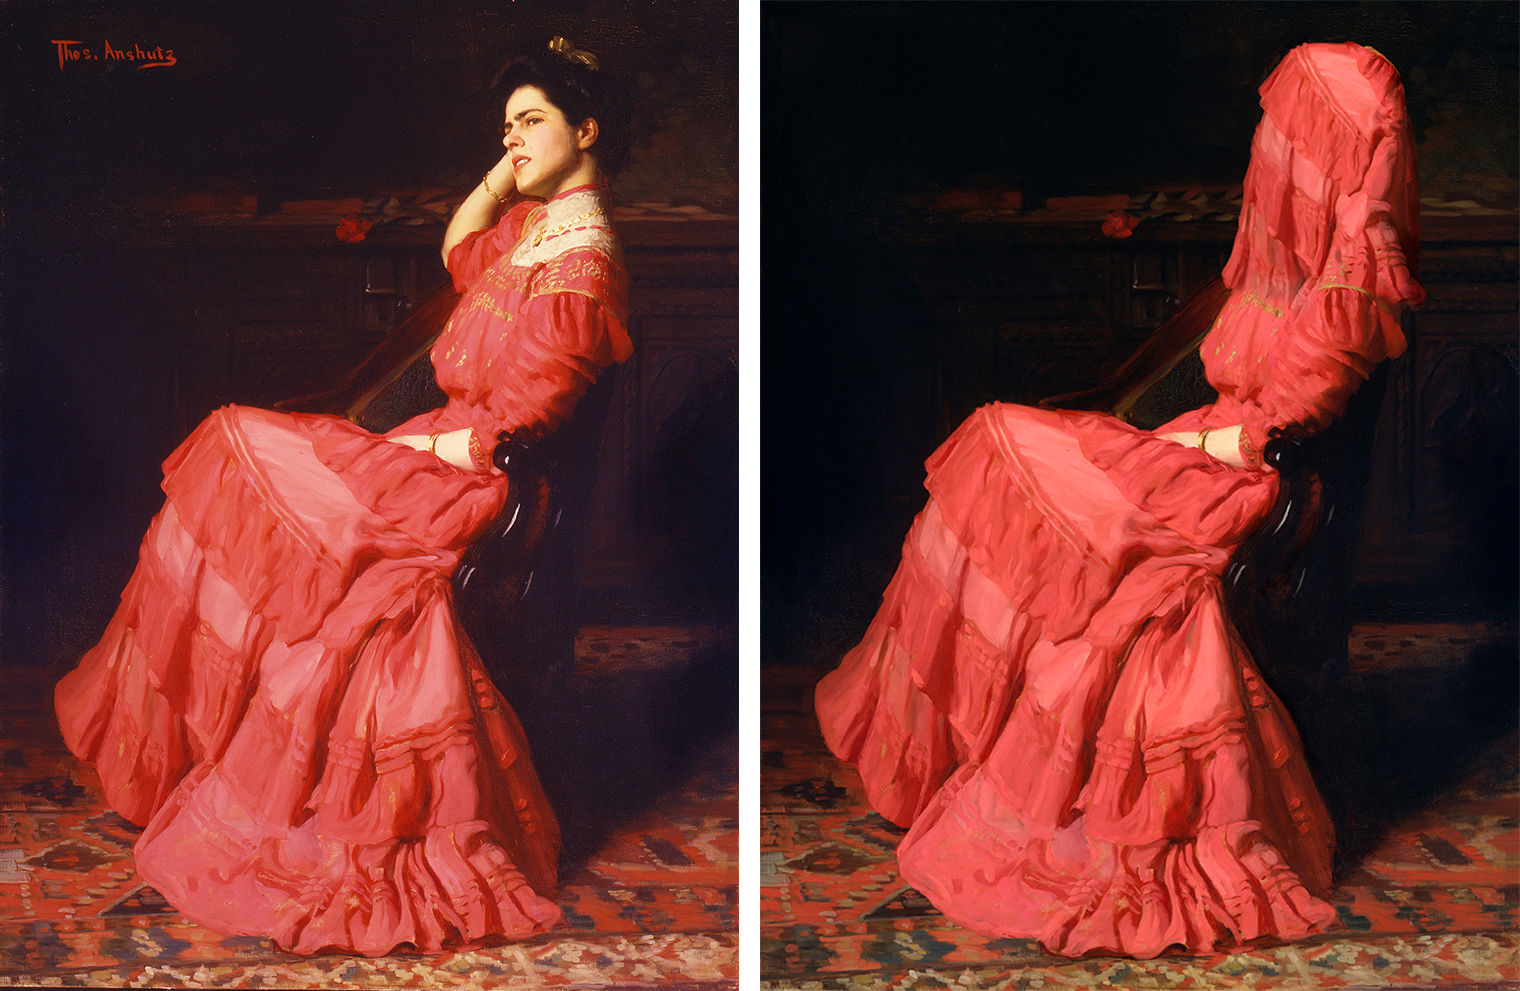 image on left shows a woman reclining in a red dress, image on right shows the same image with red cloth covering her face